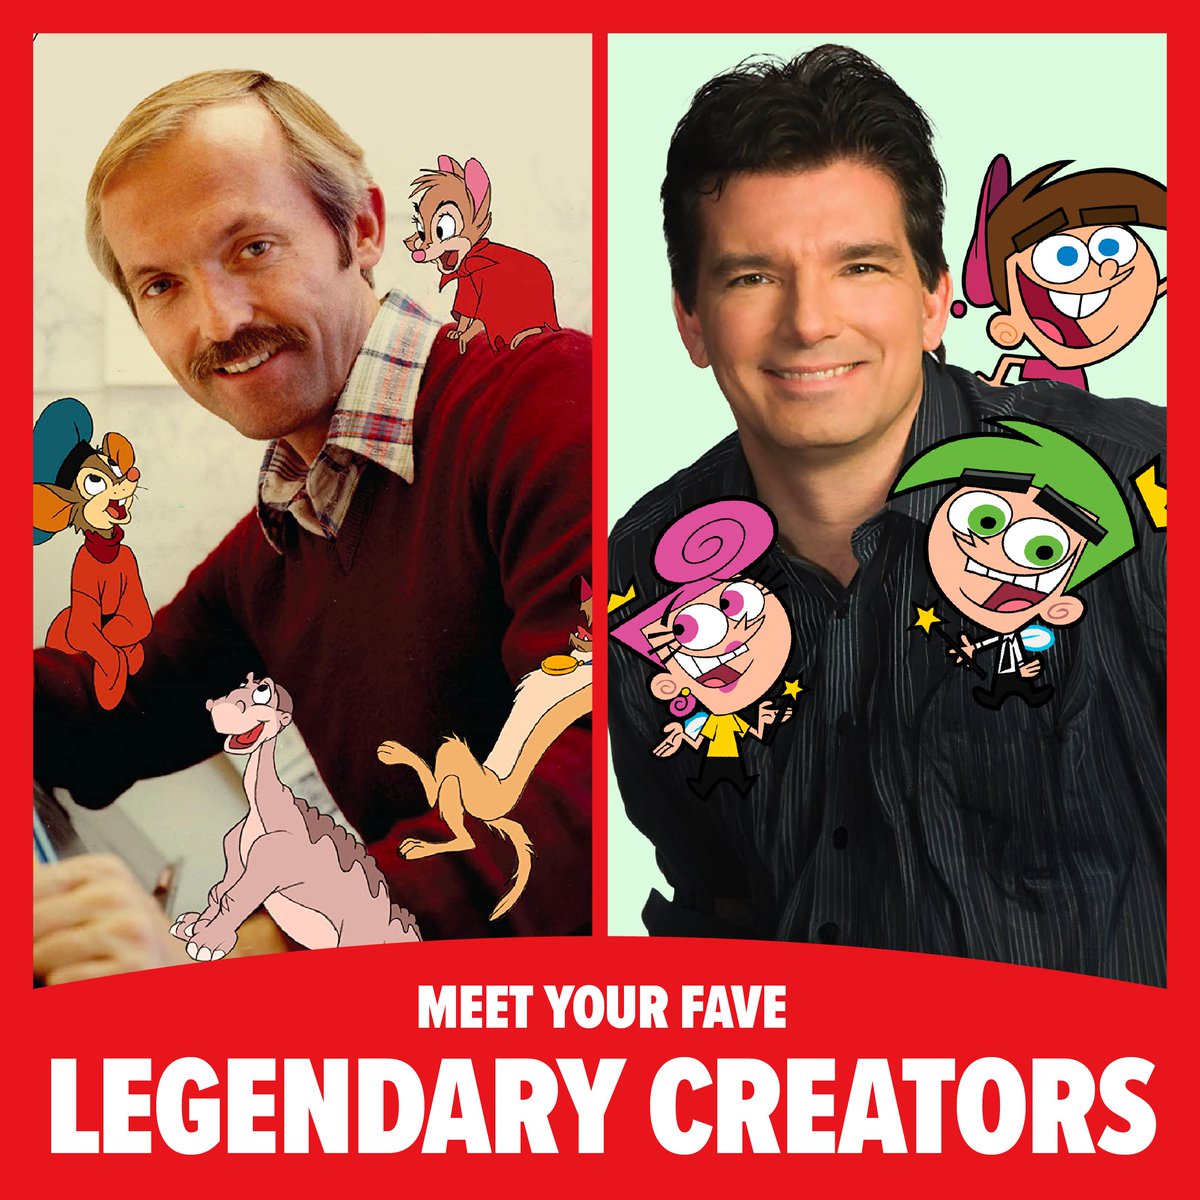 If you love cartoons, you won't want to miss these legends. Meet Don Bluth (The Land Before Time, An American Tail, All Dogs Go to Heaven), and Butch Hartman (The Fairly OddParents, Danny Phantom) at FAN EXPO Canada this August. spr.ly/6012btRMy